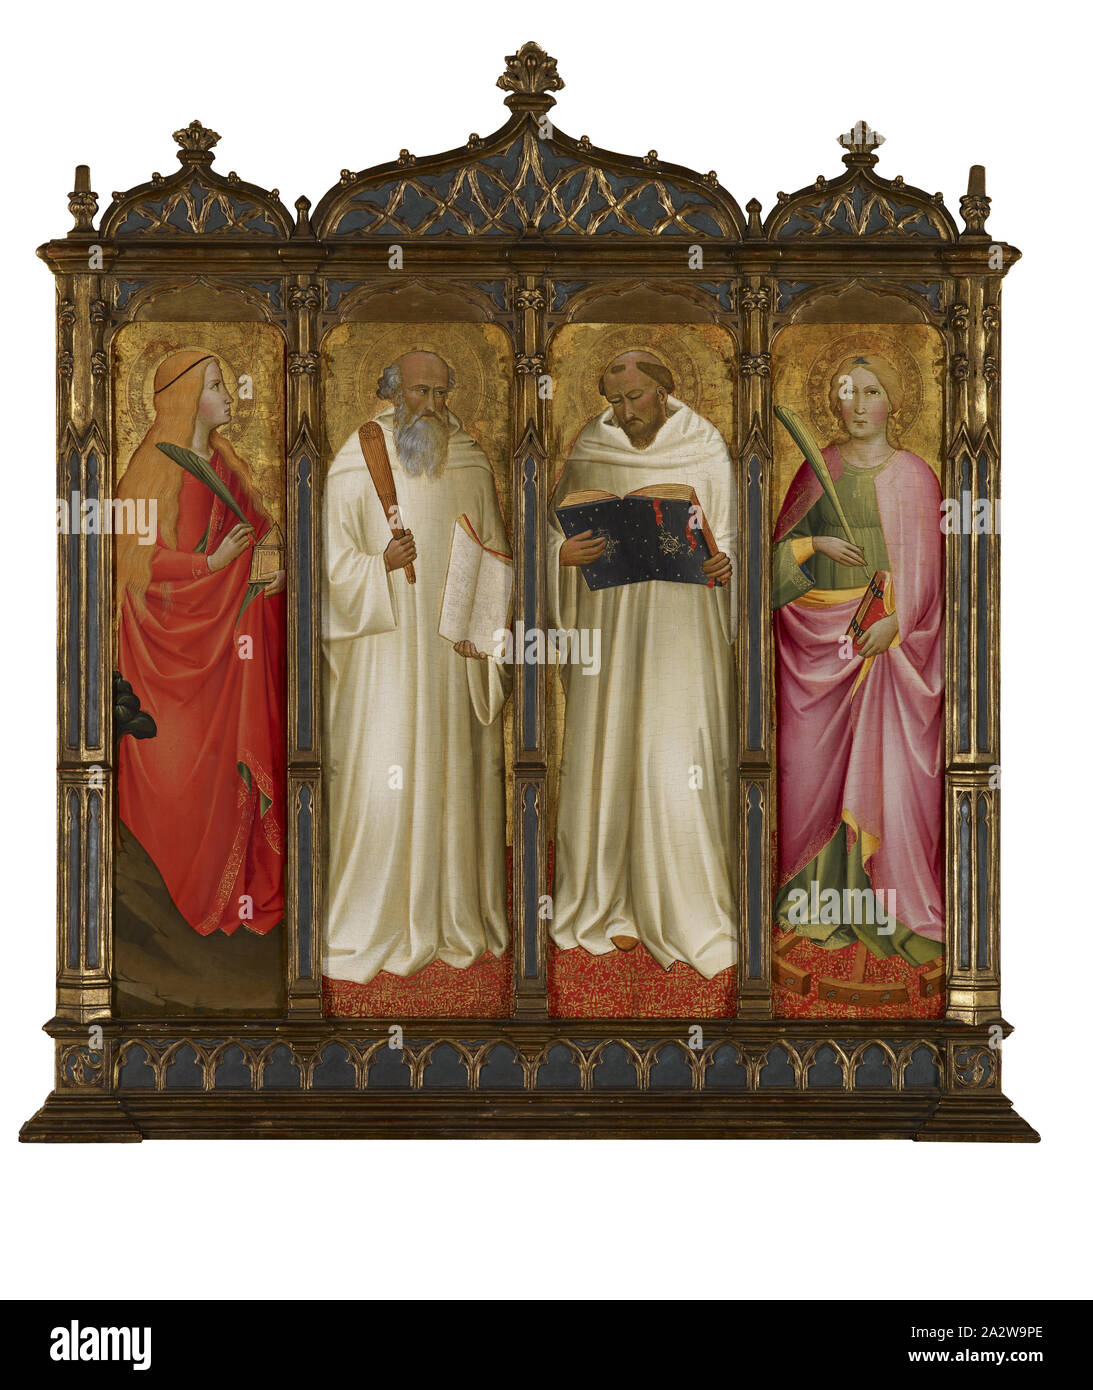 St. Mary Magdalene, St. Benedict, St. Bernard of Clairveaux and St. Catherine of Alexandria, Agnolo Gaddi (Italian, 1340-1396), about 1380-1390, tempera and gold leaf on wood, 28 x 8 in. (each) approximately 40 x 41 x 3-3/4 in. (4 panels installed), European Painting and Sculpture Before 1800 Stock Photo